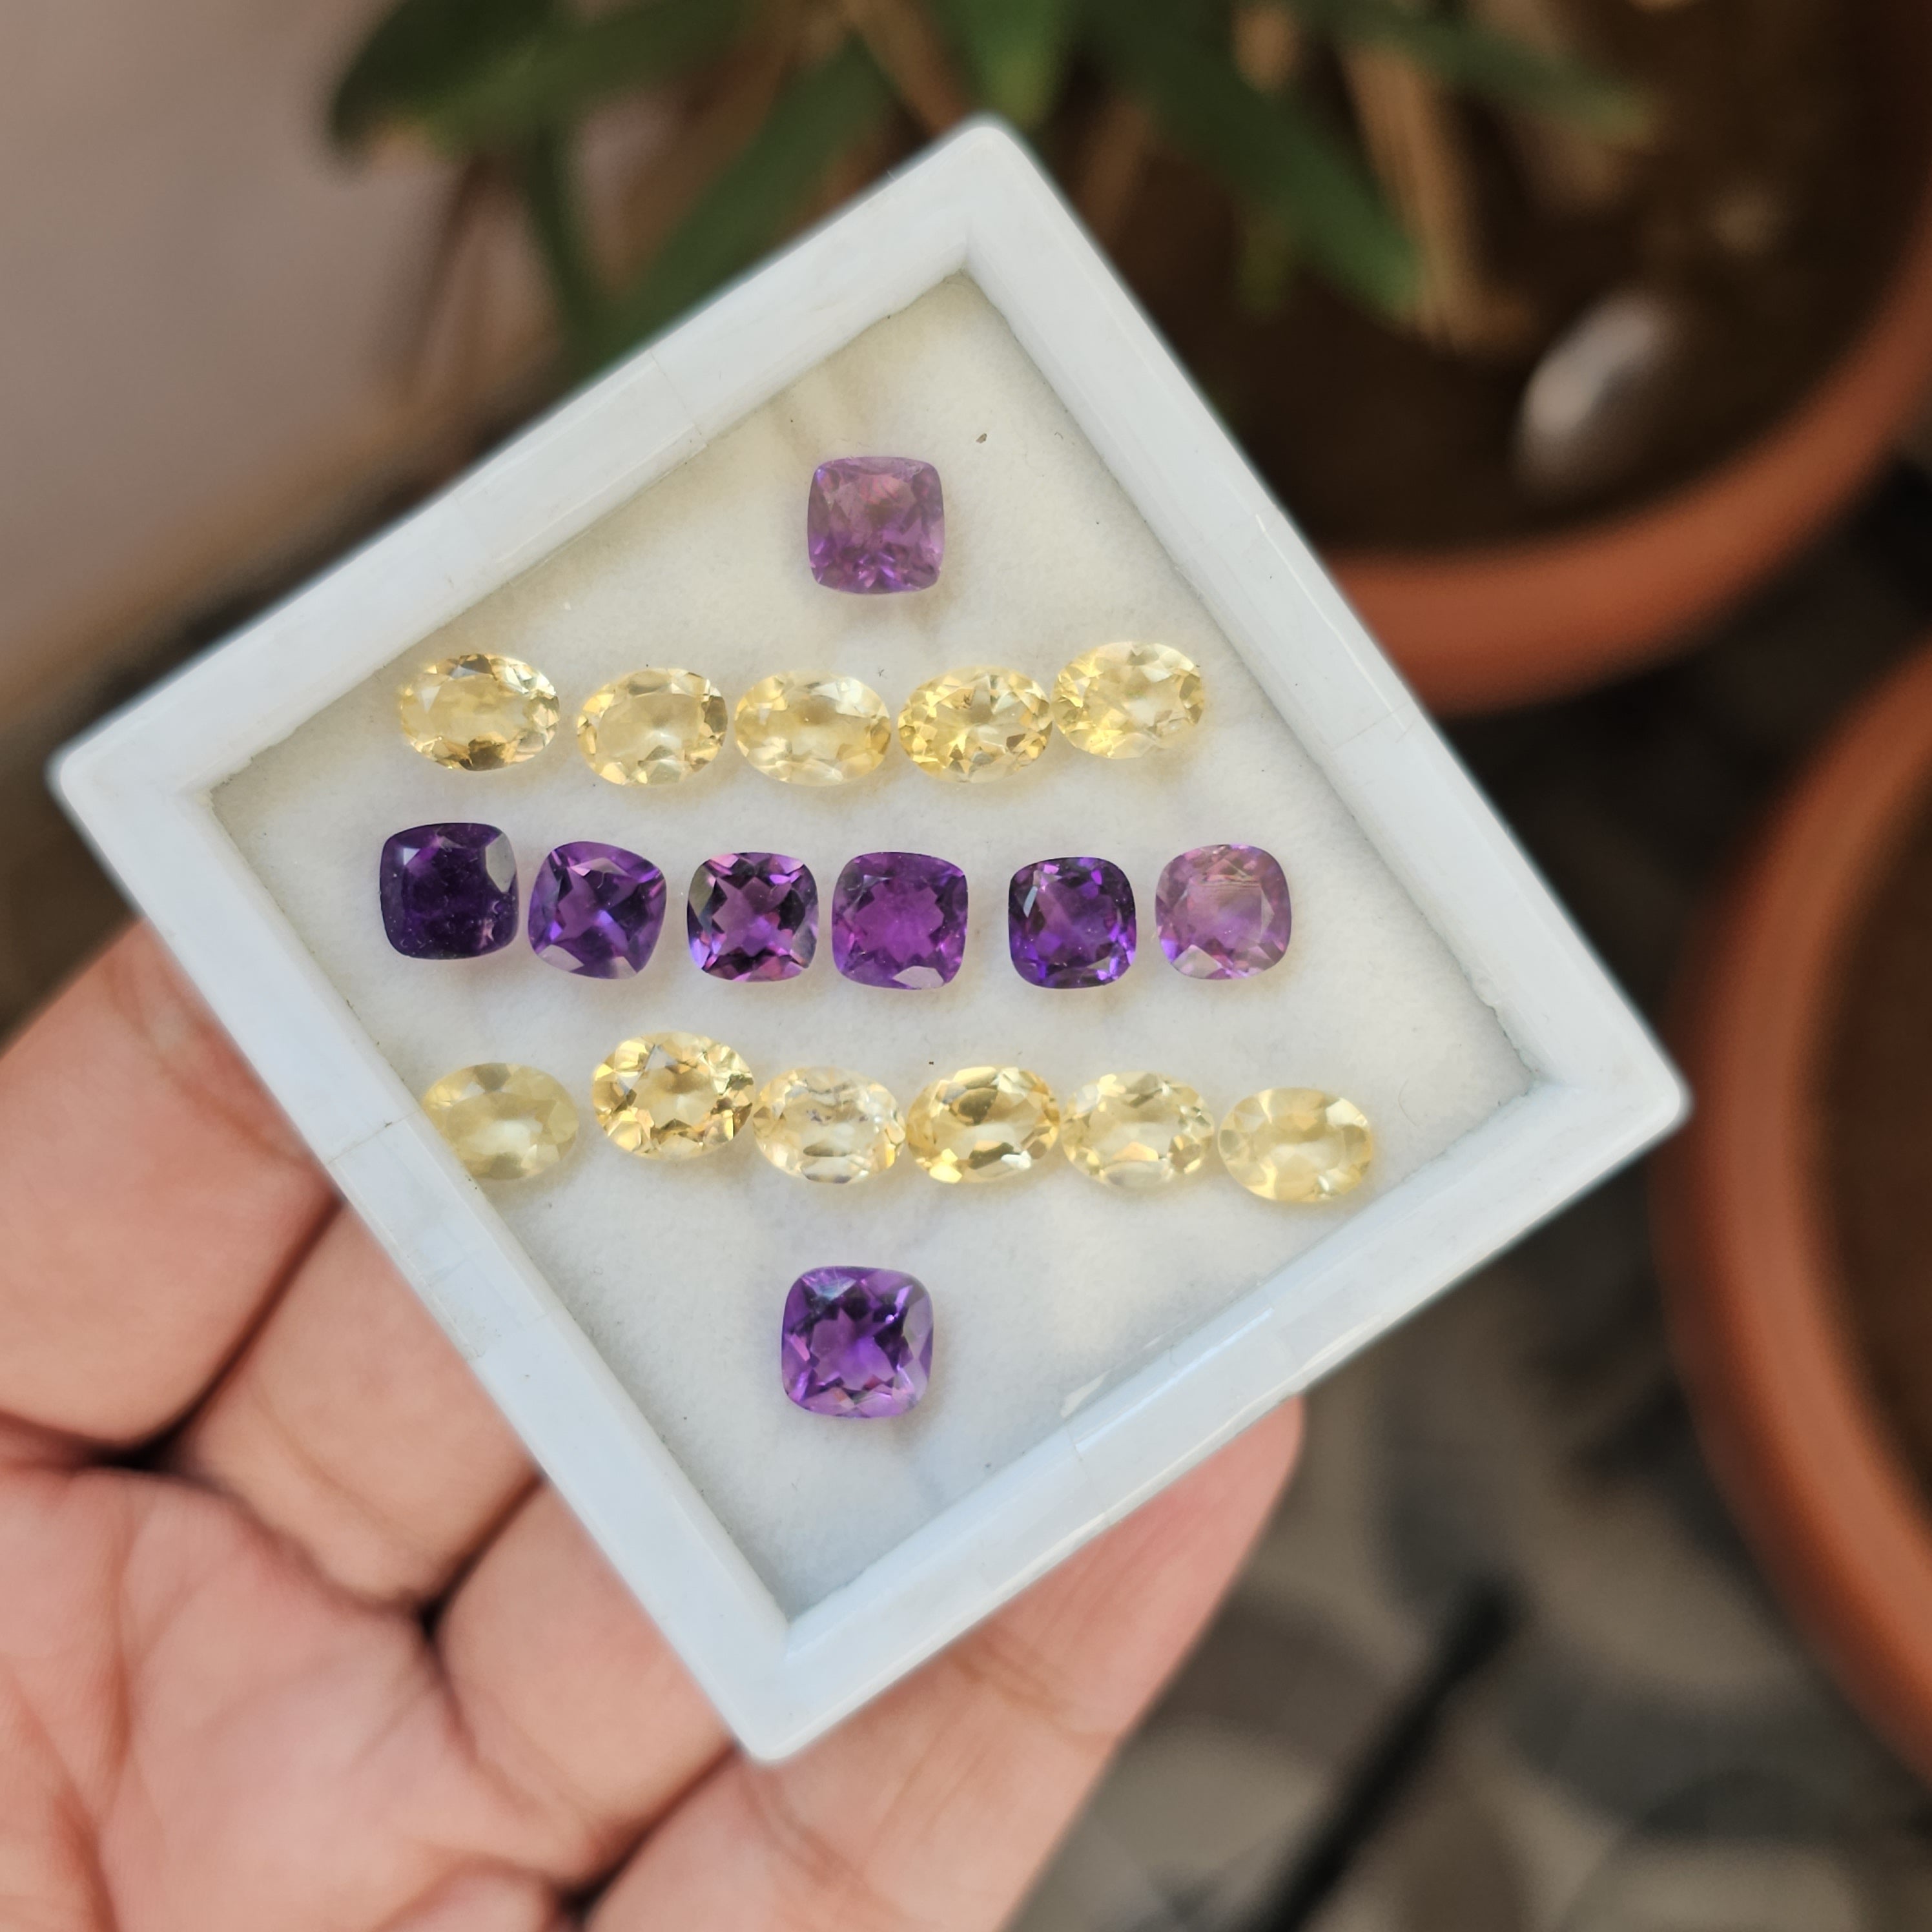 19 Pcs Natural Citrine And Amethyst Faceted Gemstone Shape: Cushion And Oval| Size: 8mm - The LabradoriteKing